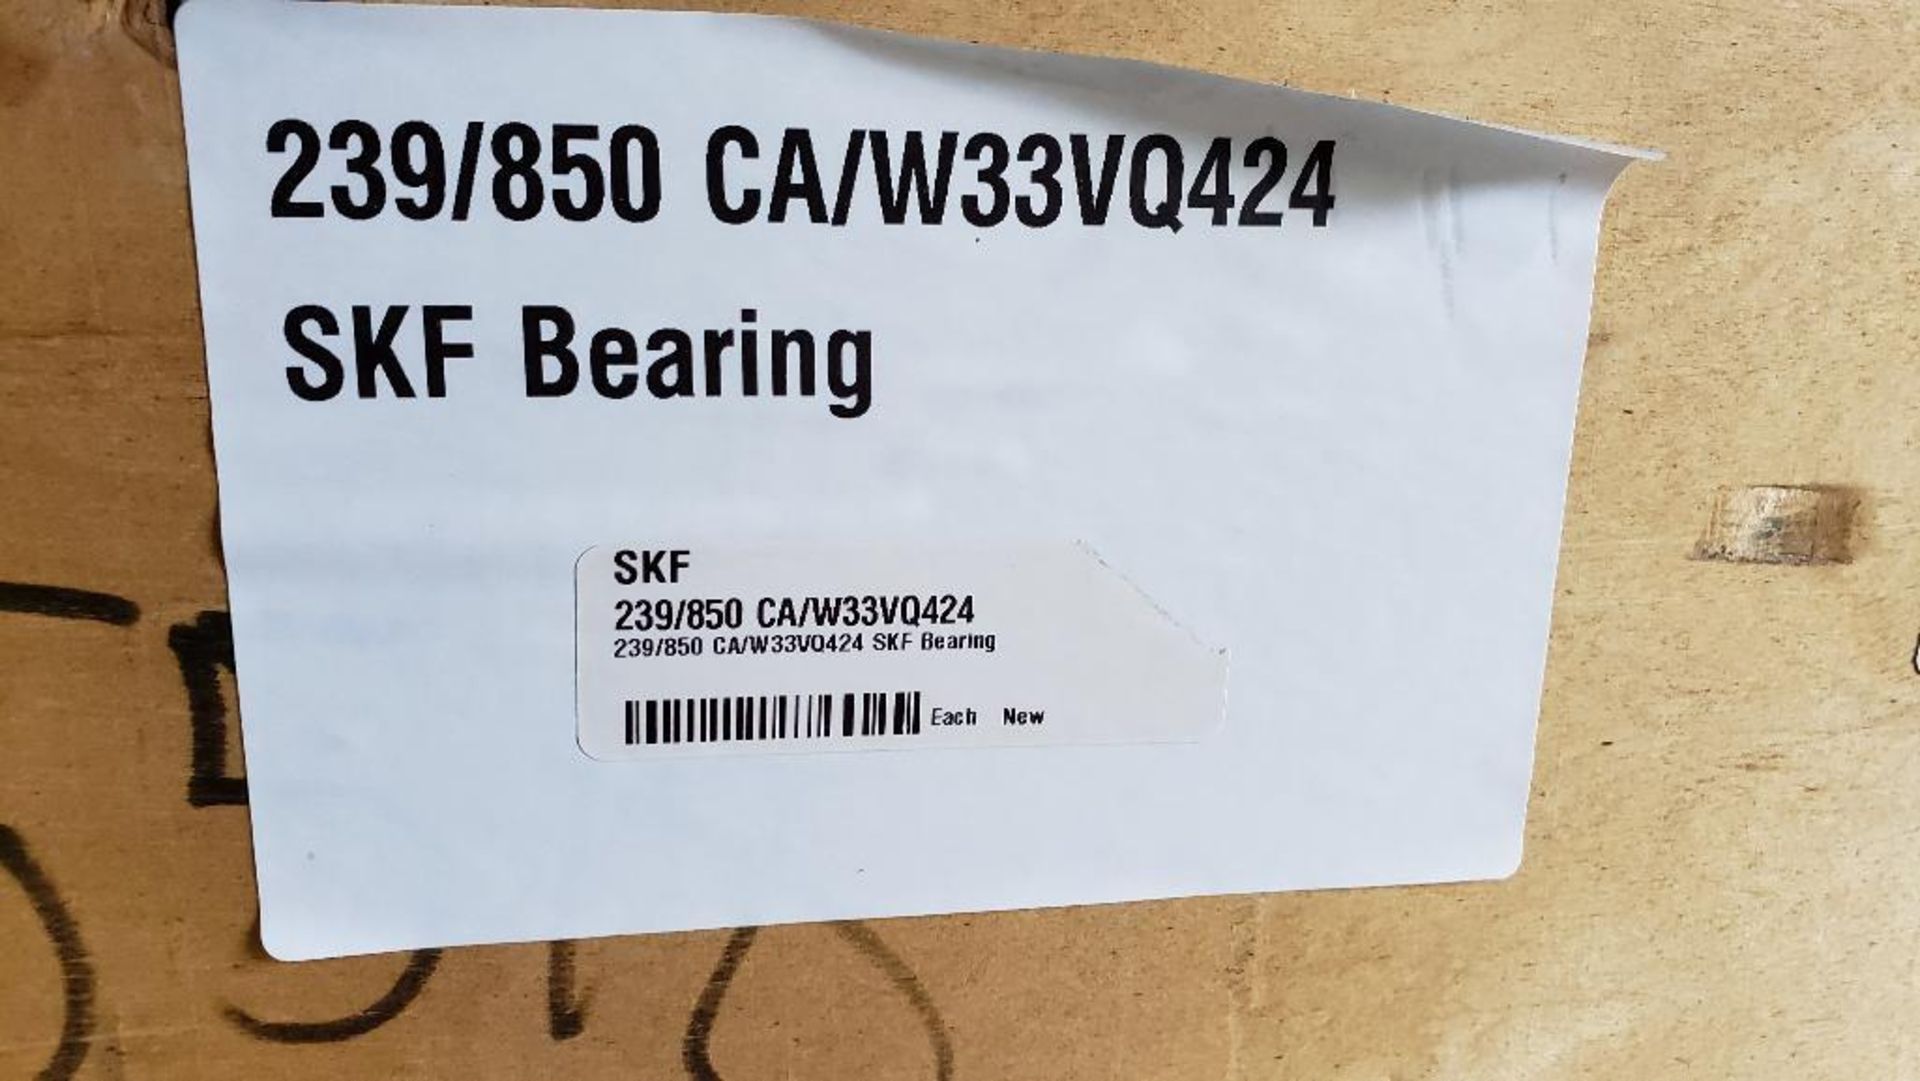 SKF super precision large capacity bearing. Part number 239/850 CA/W33VQ424. . New in crate. . - Image 6 of 6